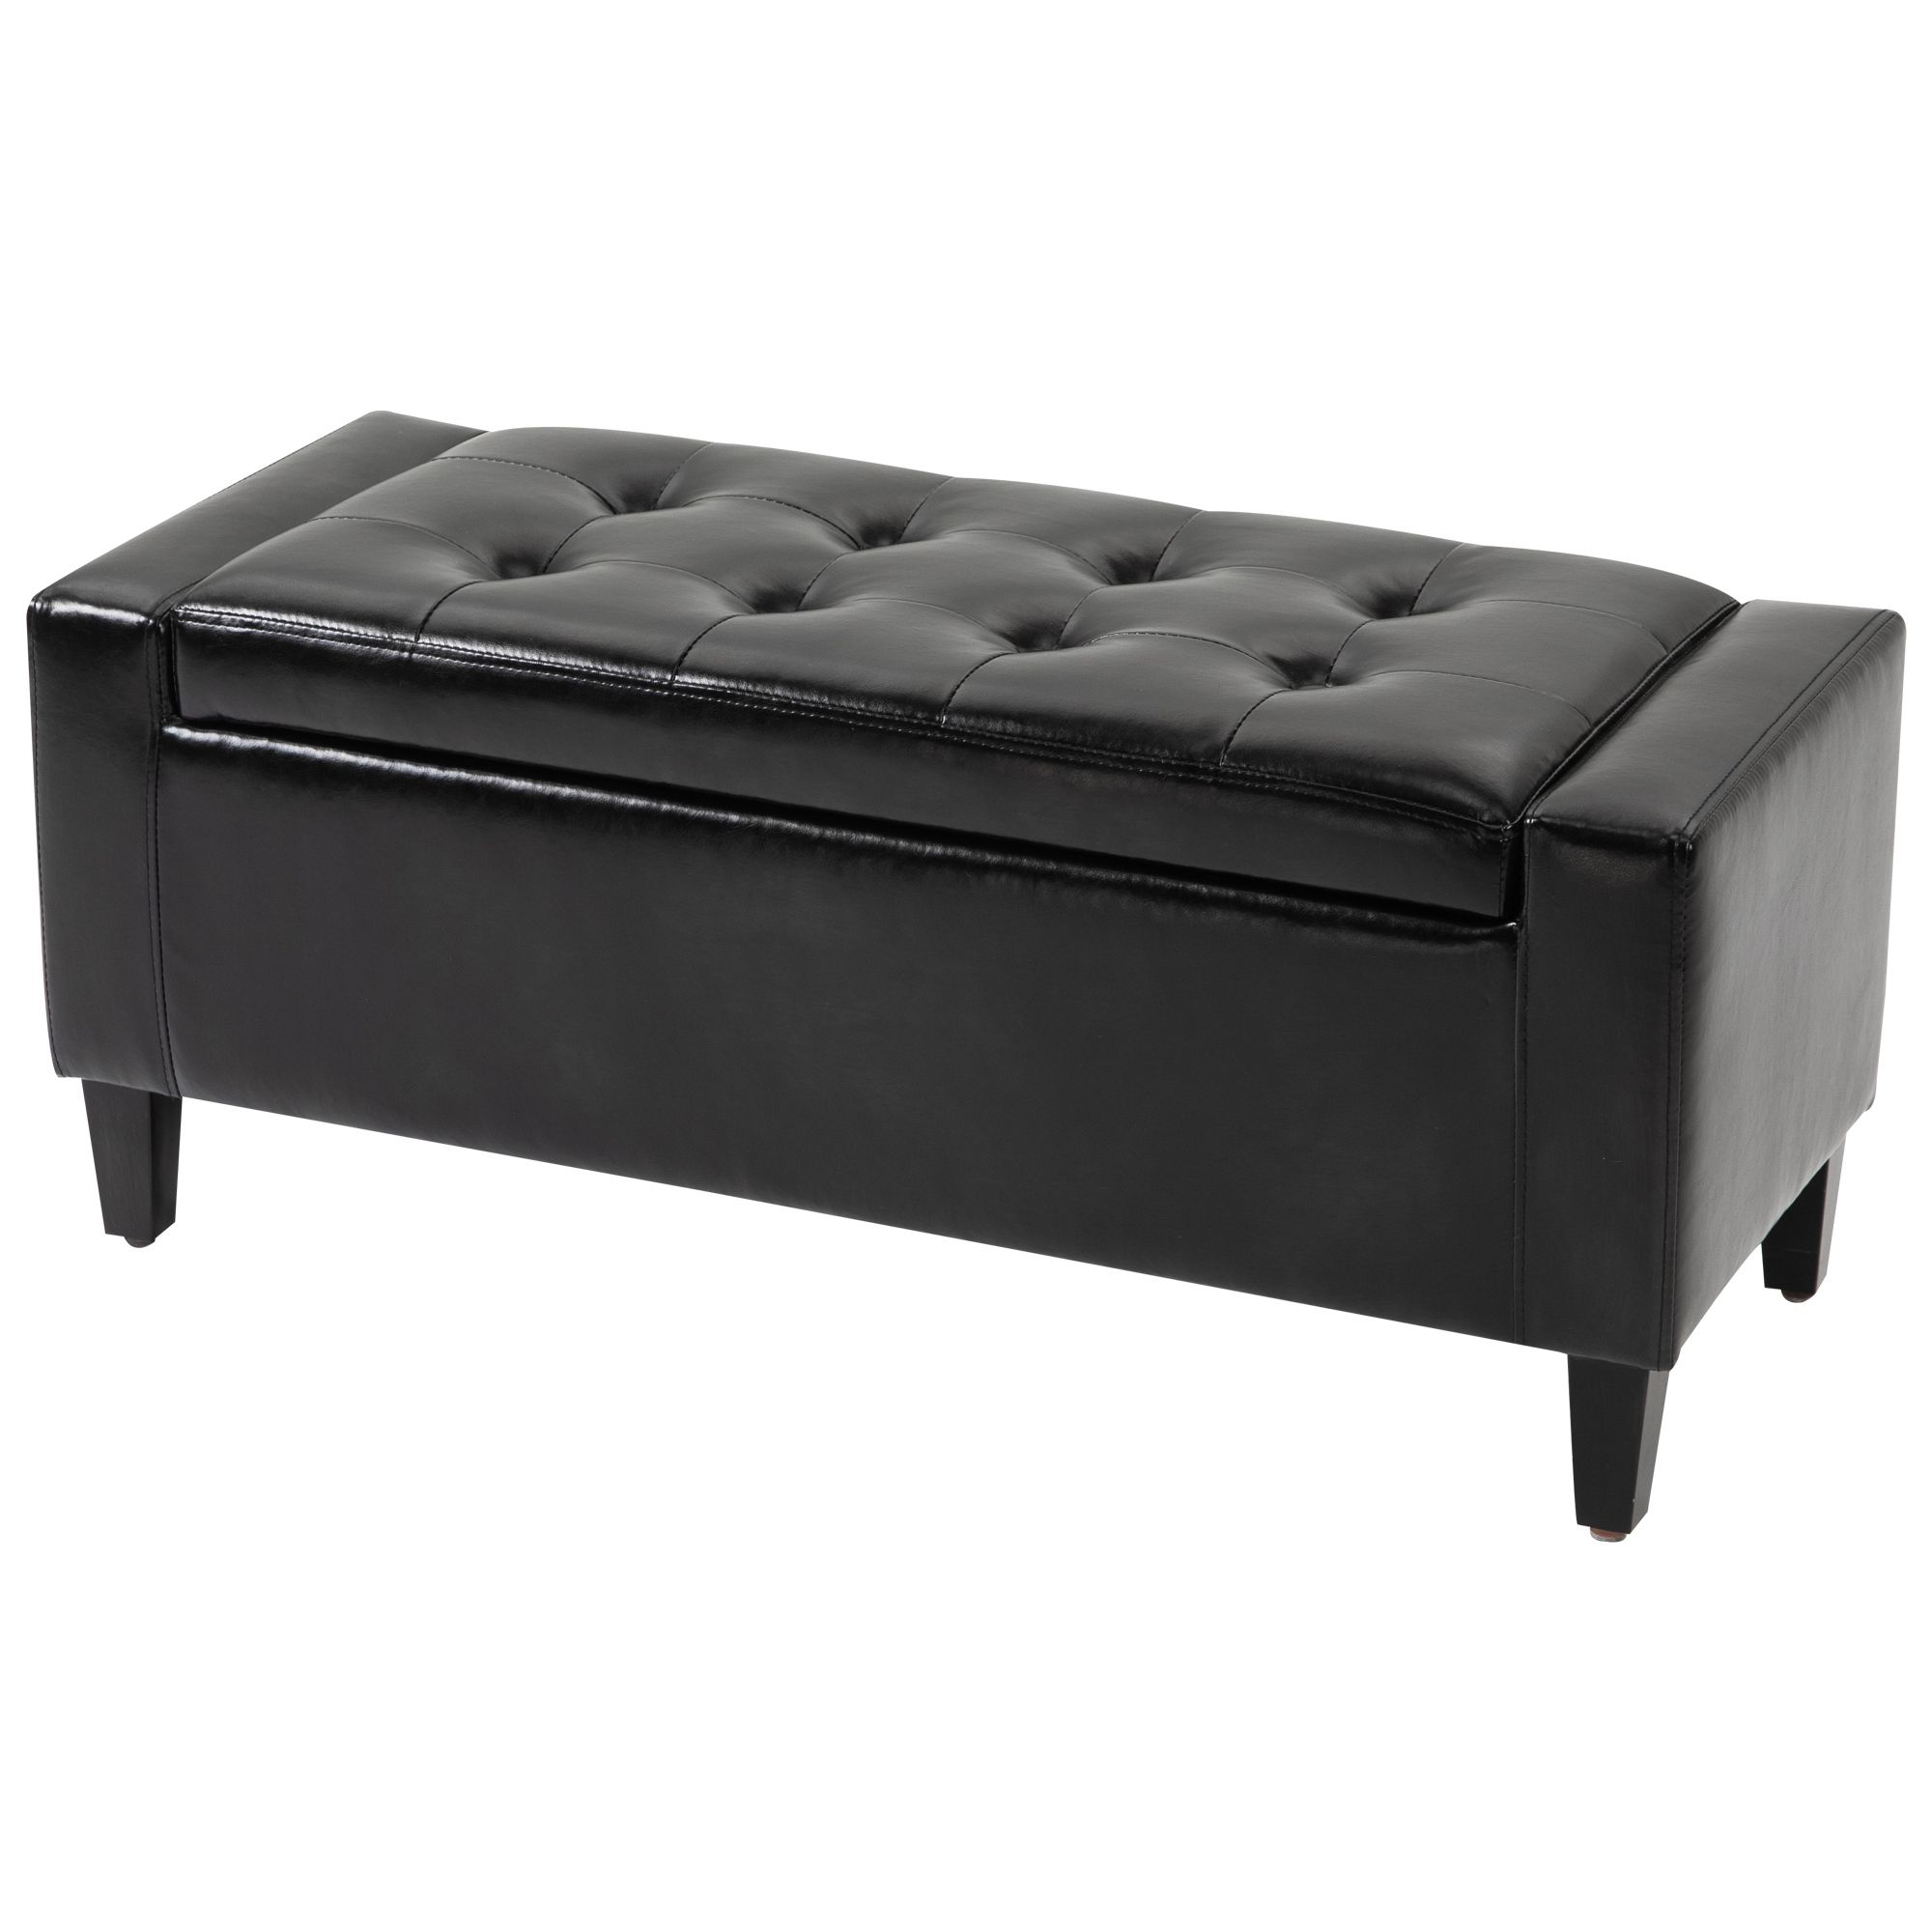 Current Homcom Pu Leather Upholstered Lift Top Tufted Ottoman Black, Ottoman Regarding Black Leather And Bronze Steel Tufted Ottomans (View 6 of 10)